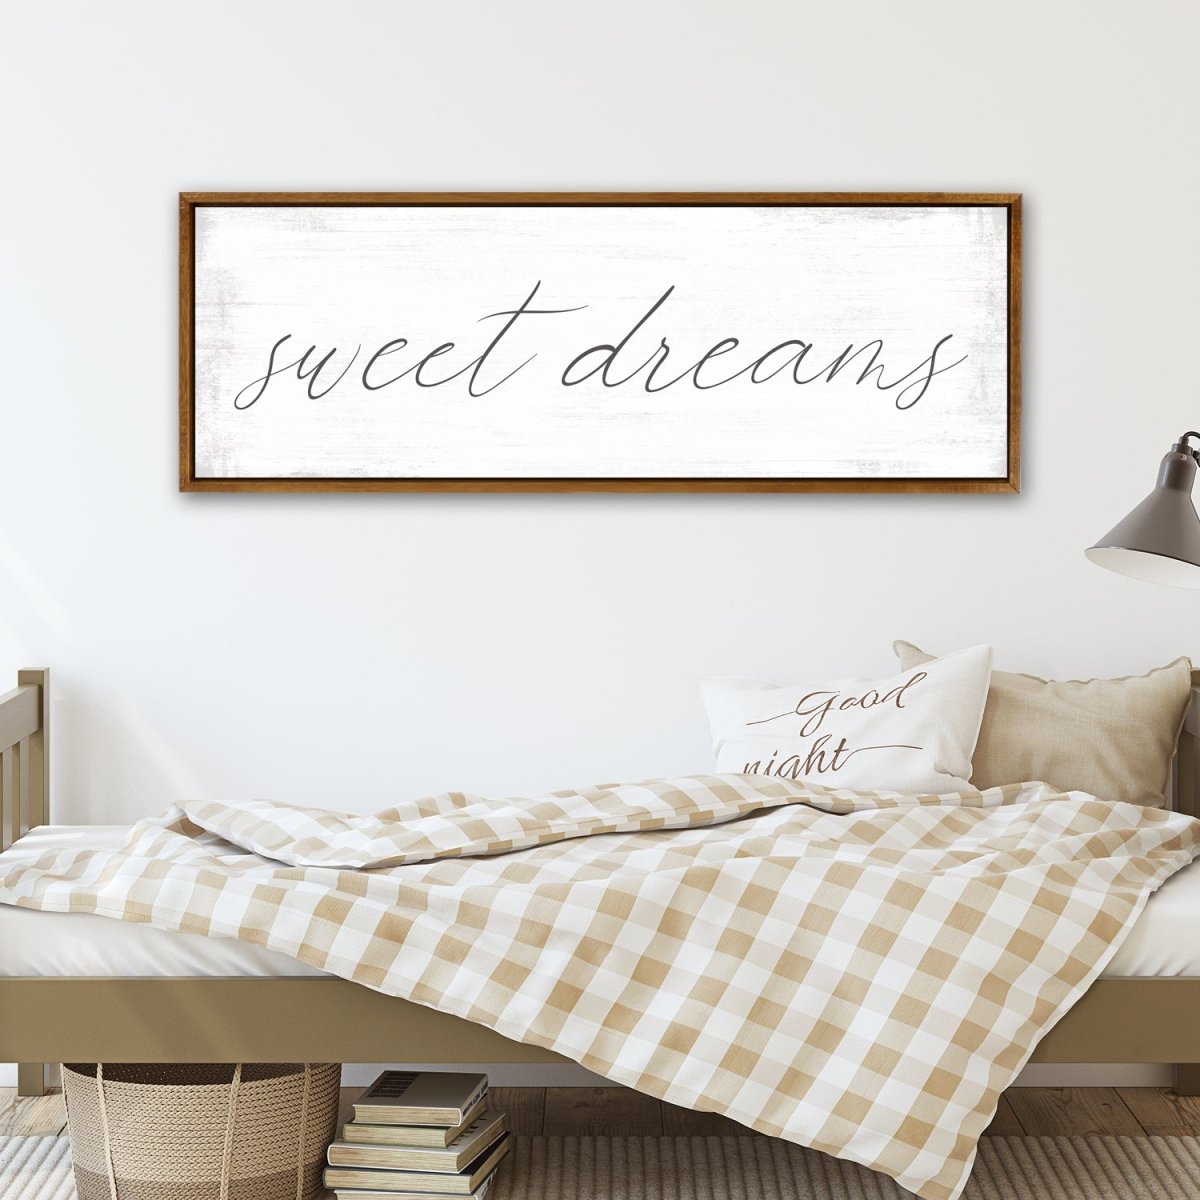 Sweet Dreams Sign Above the Bed in Master Bedroom - Pretty Perfect Studio